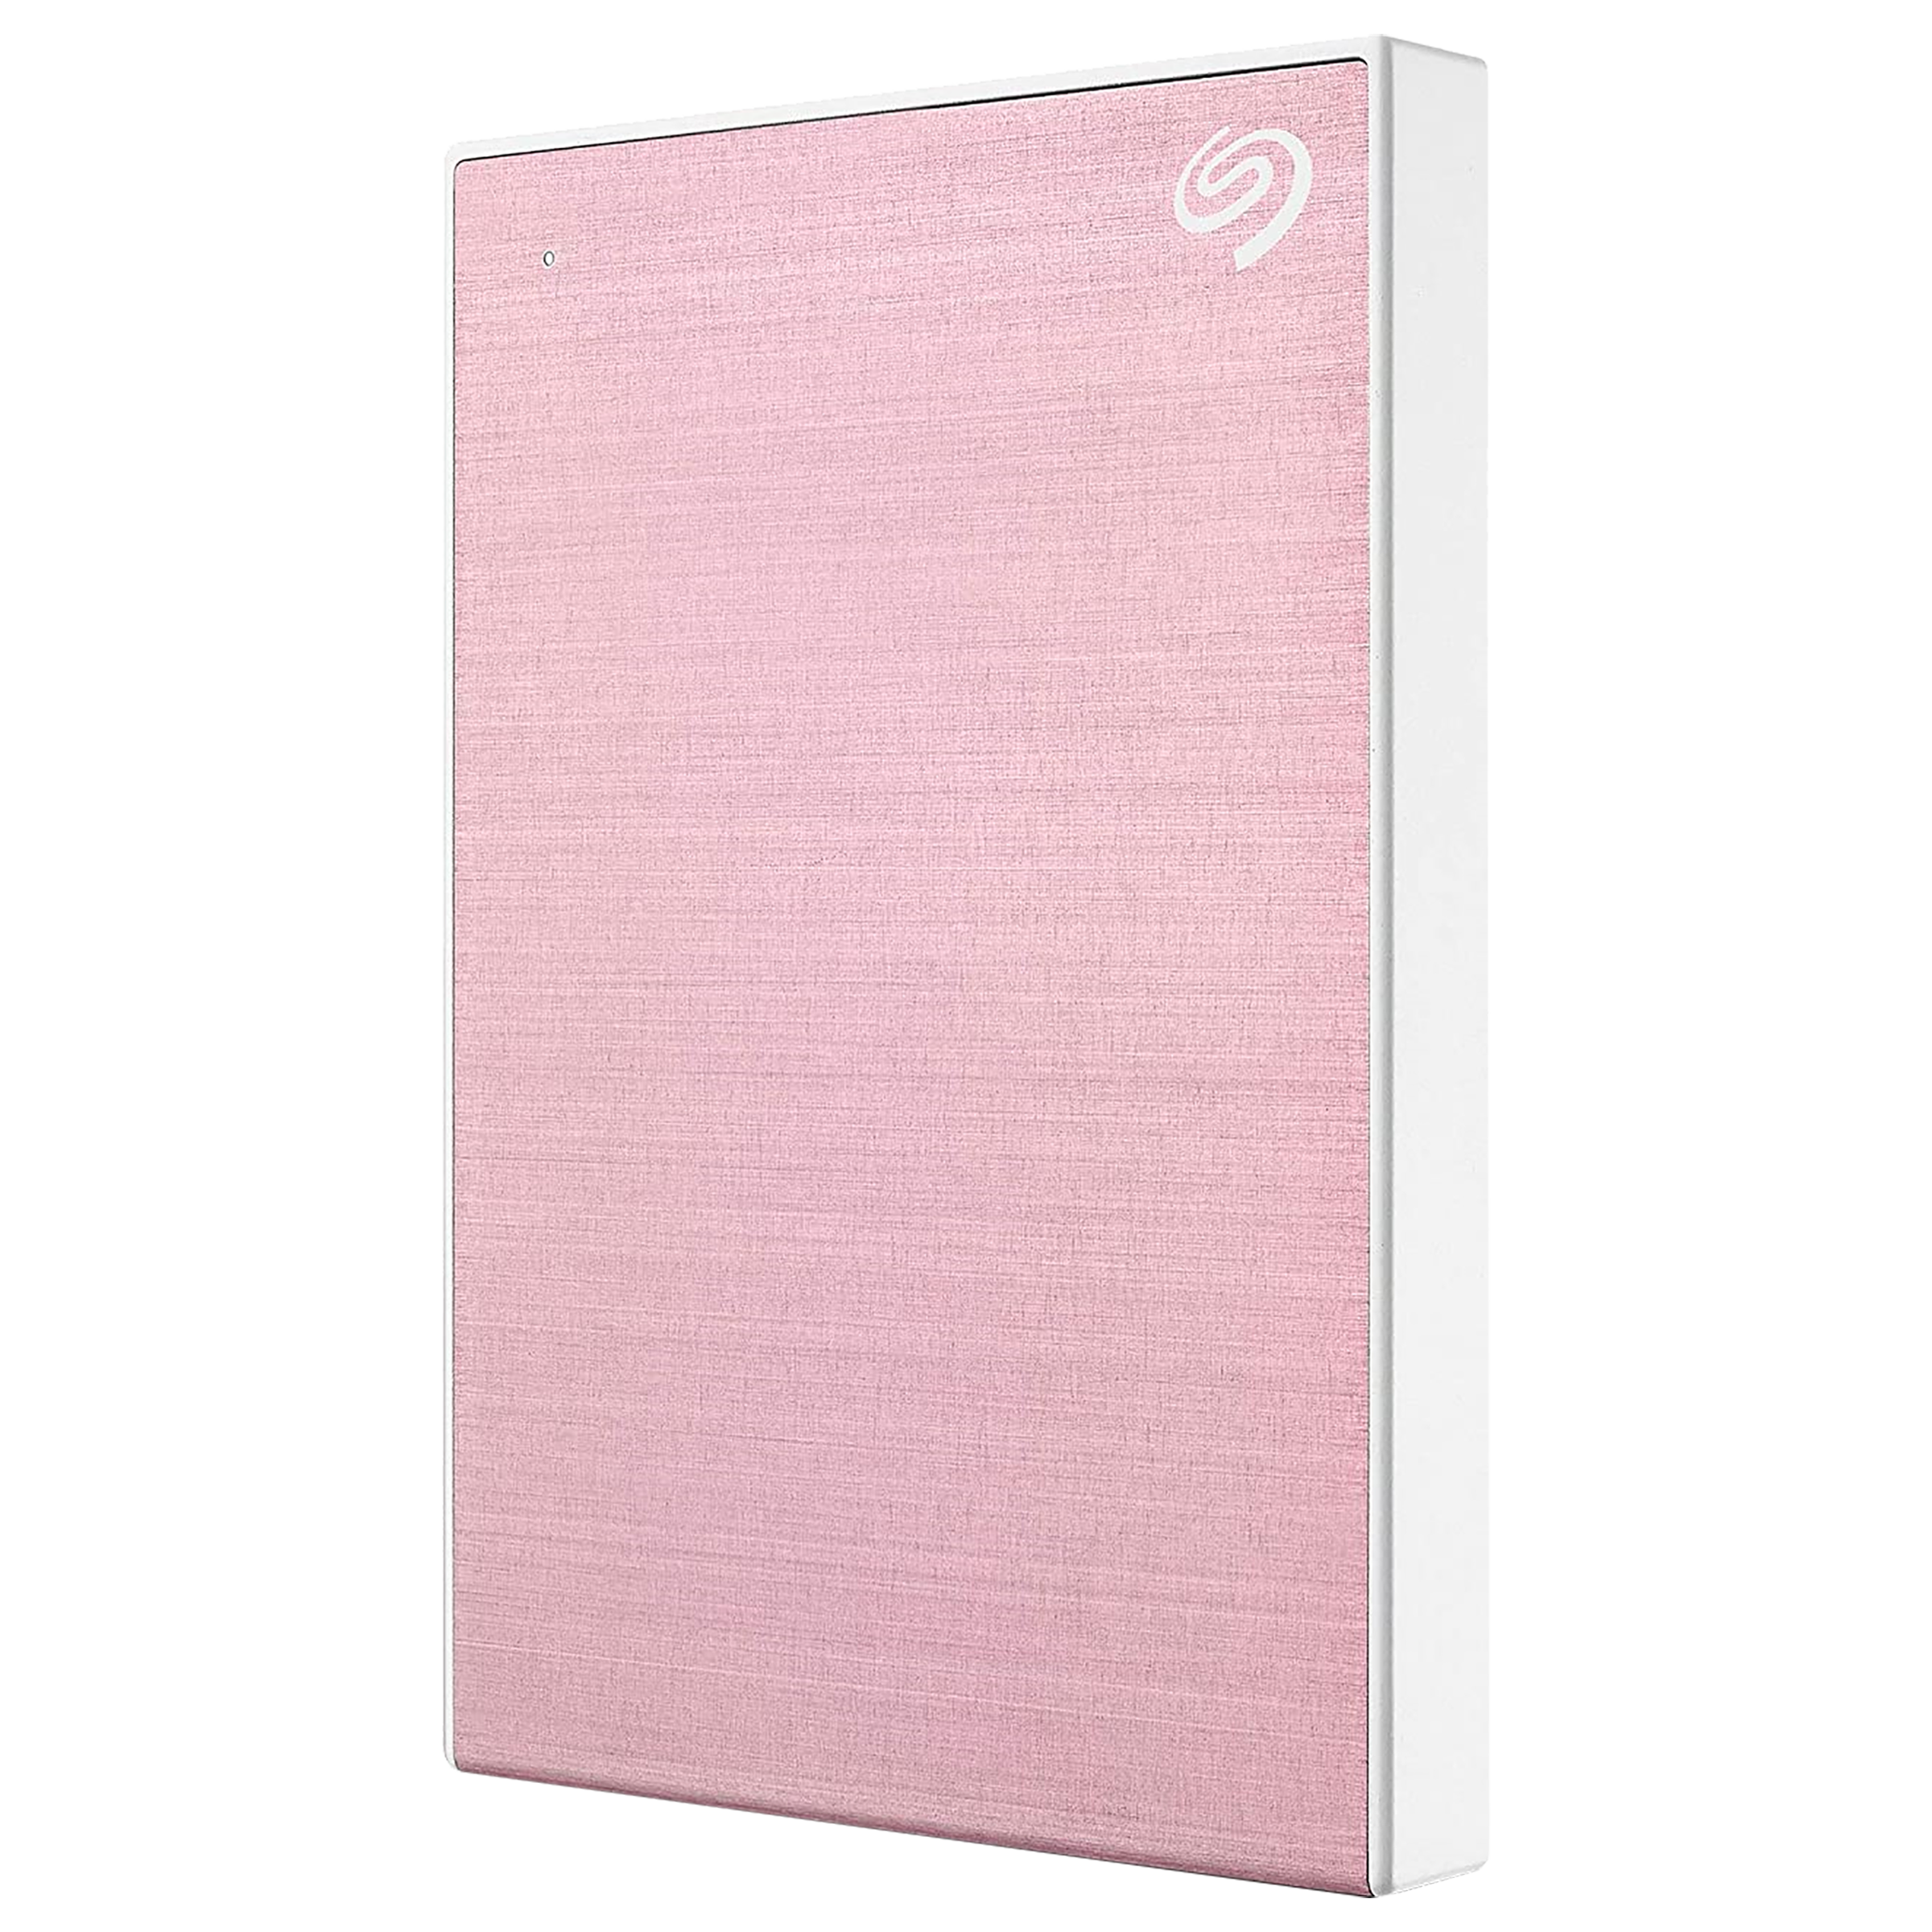 Seagate One Touch 2TB USB 3.0 Hard Disk Drive (Mac And Windows Compatible, STKY2000405, Pink)_1